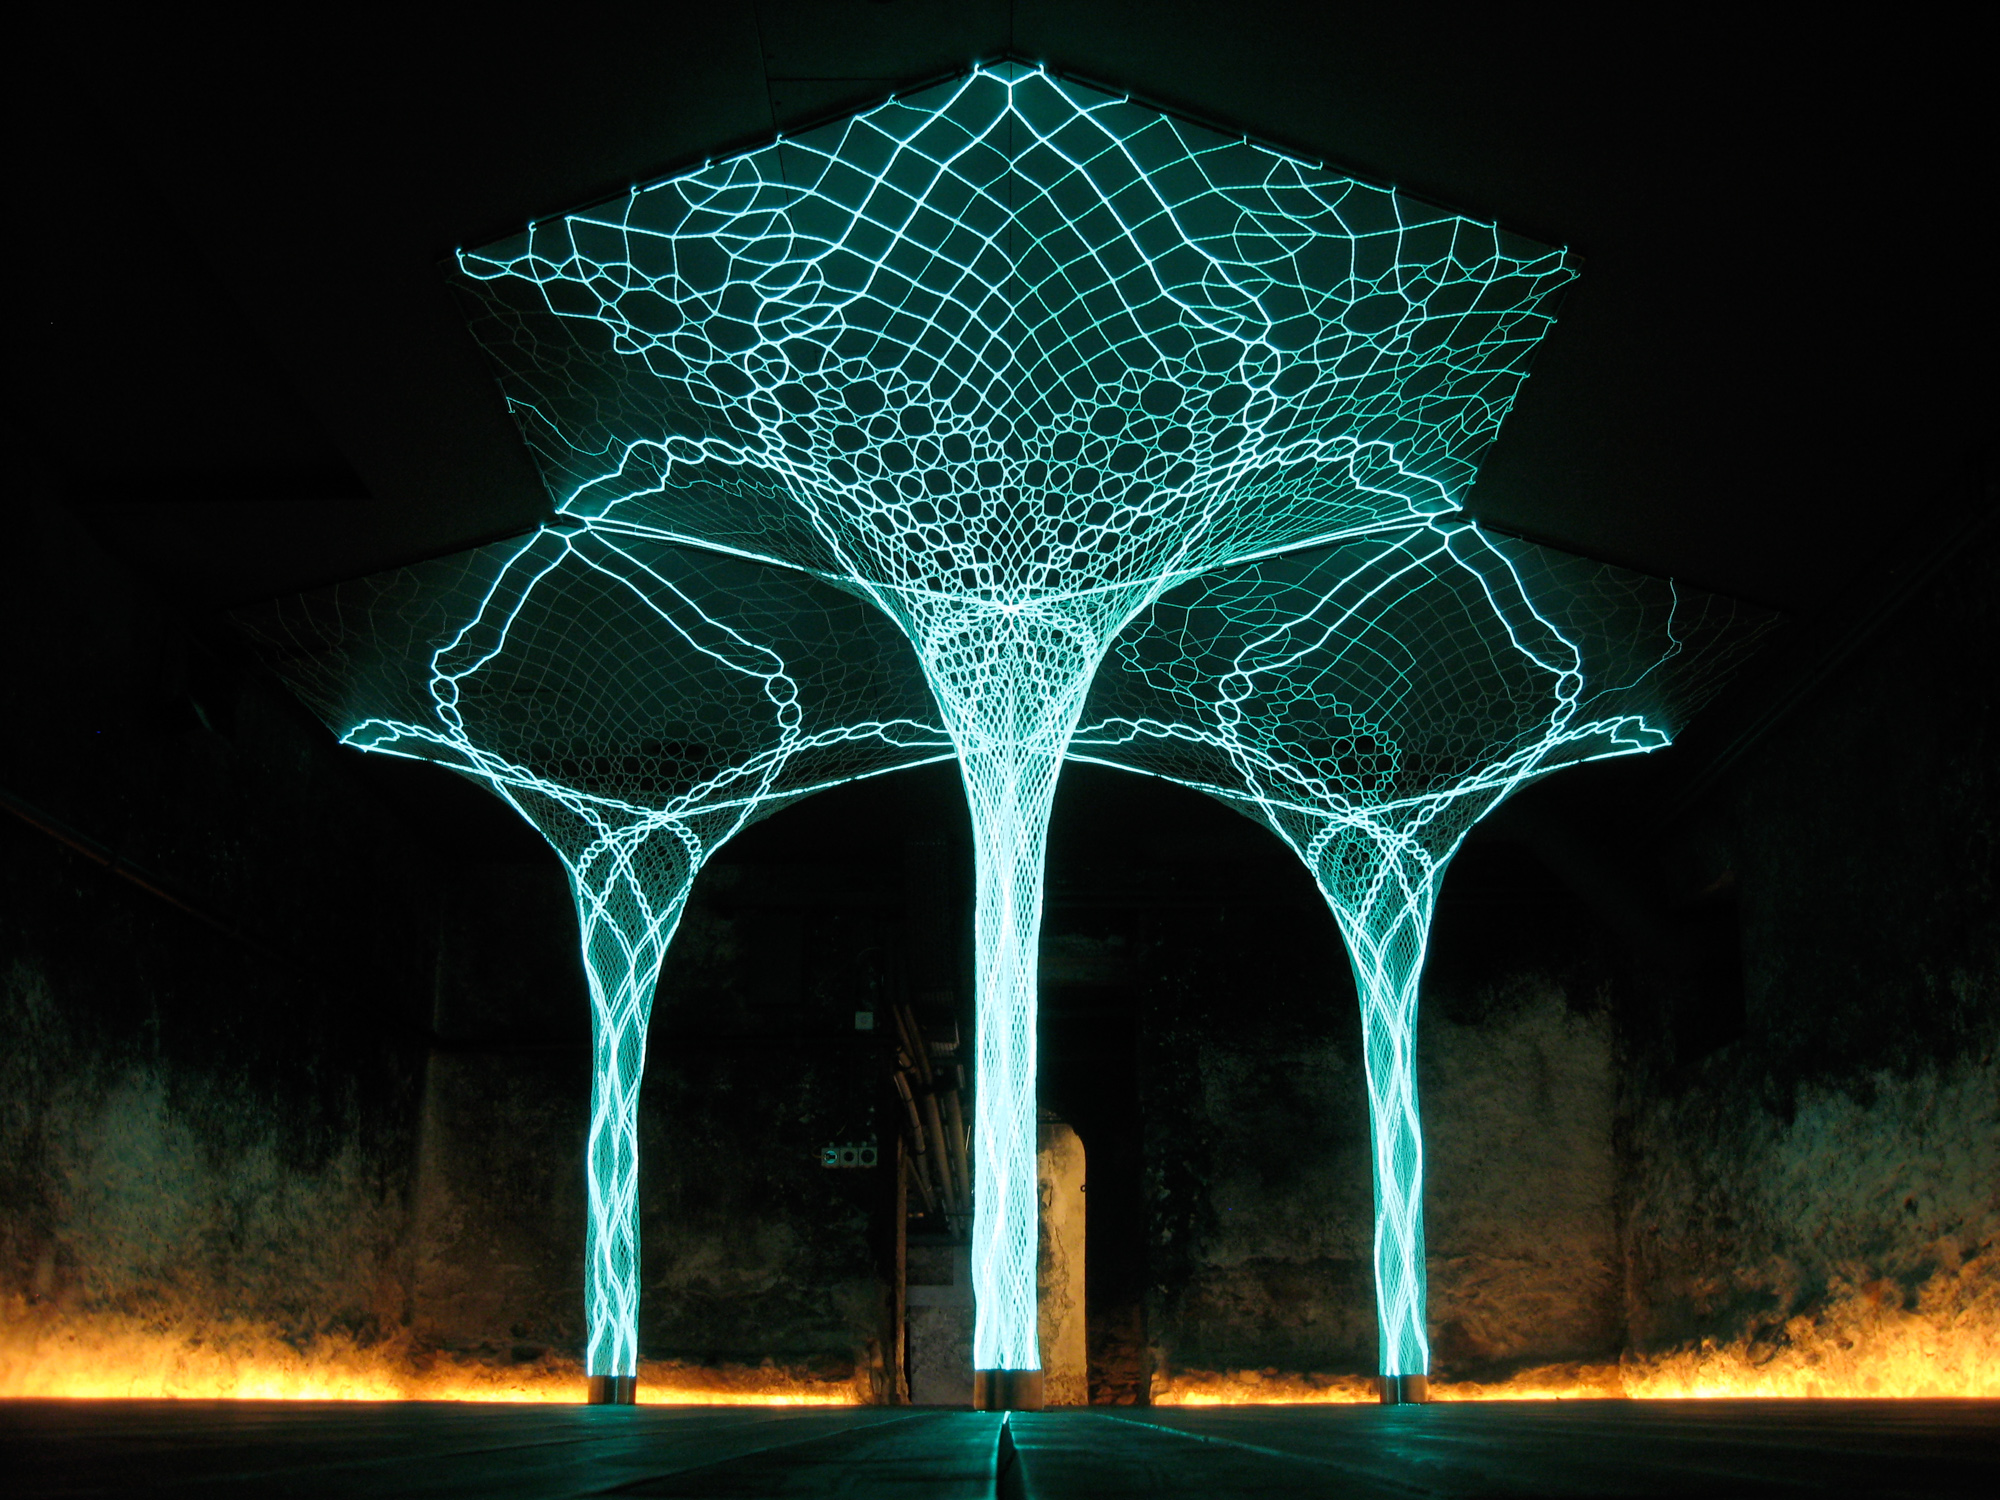 Solar Bulb Installations and Art Dedicated to The Power of The Sun